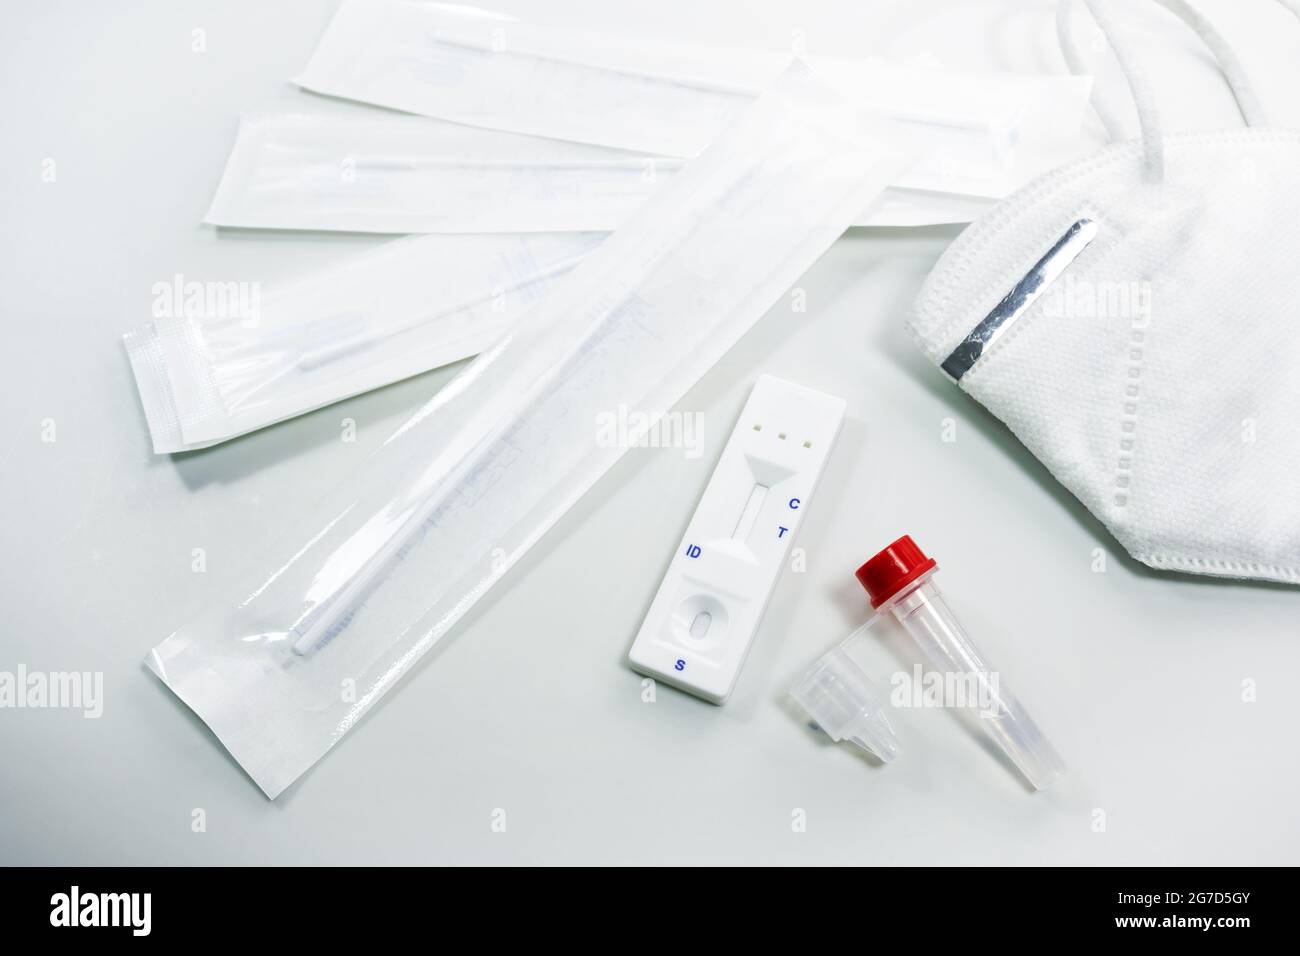 Rapid antigen self test kit for Covid-19 diagnostic at home with nasal swabs, tubes, detection device and a ffp-2 face mask, light gray background, co Stock Photo